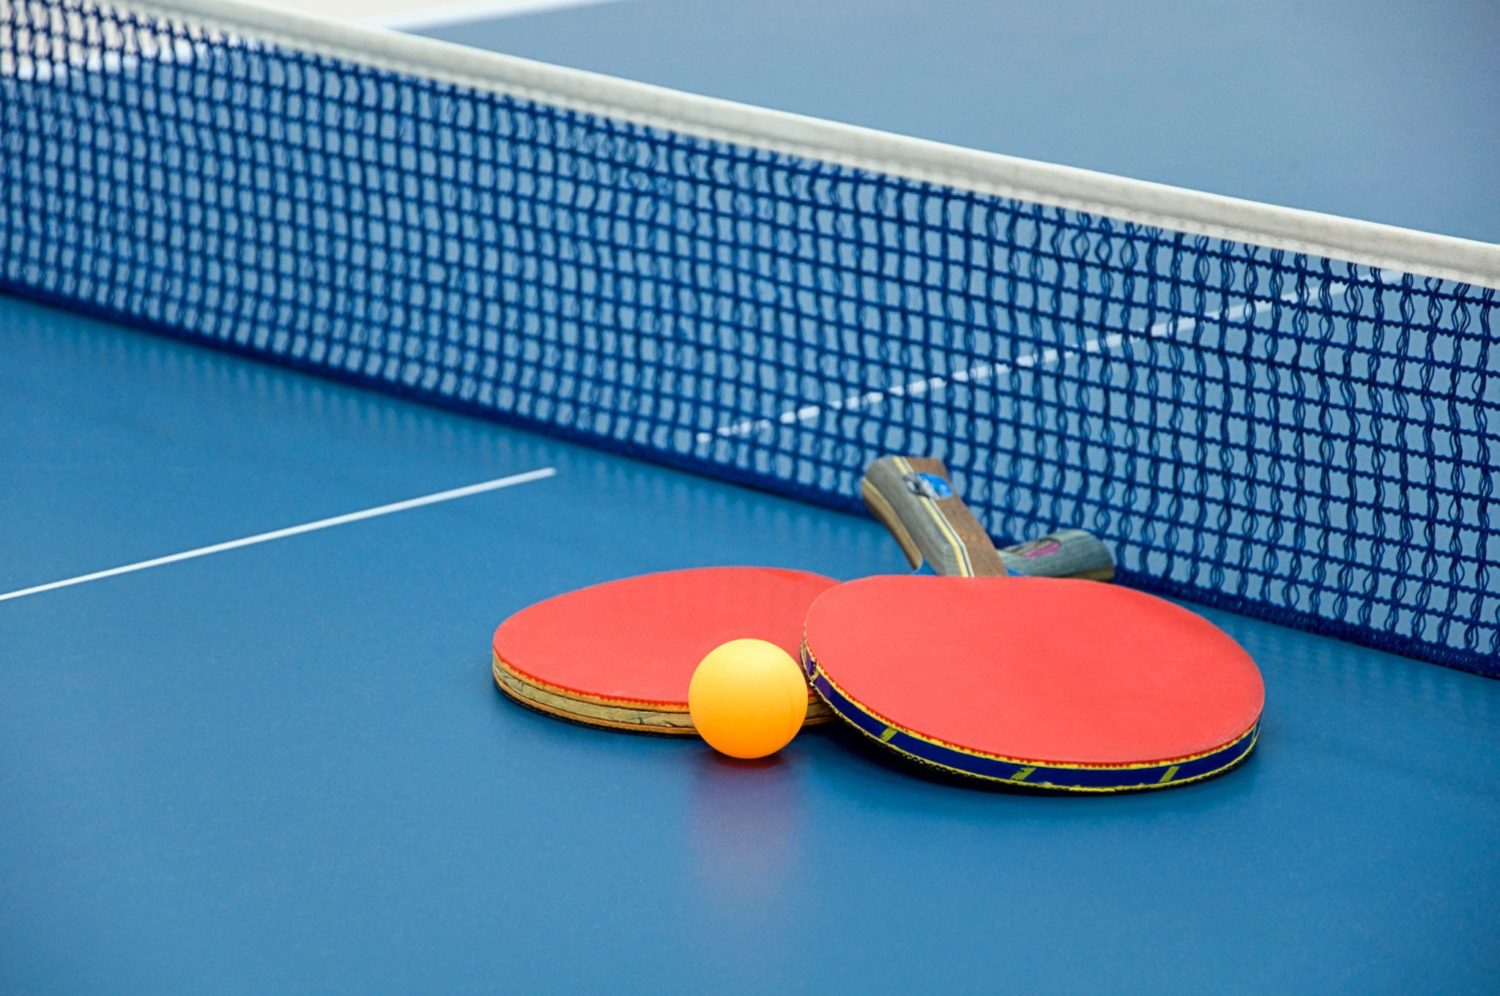 Ping Pong 🕹️ Play Now on GamePix